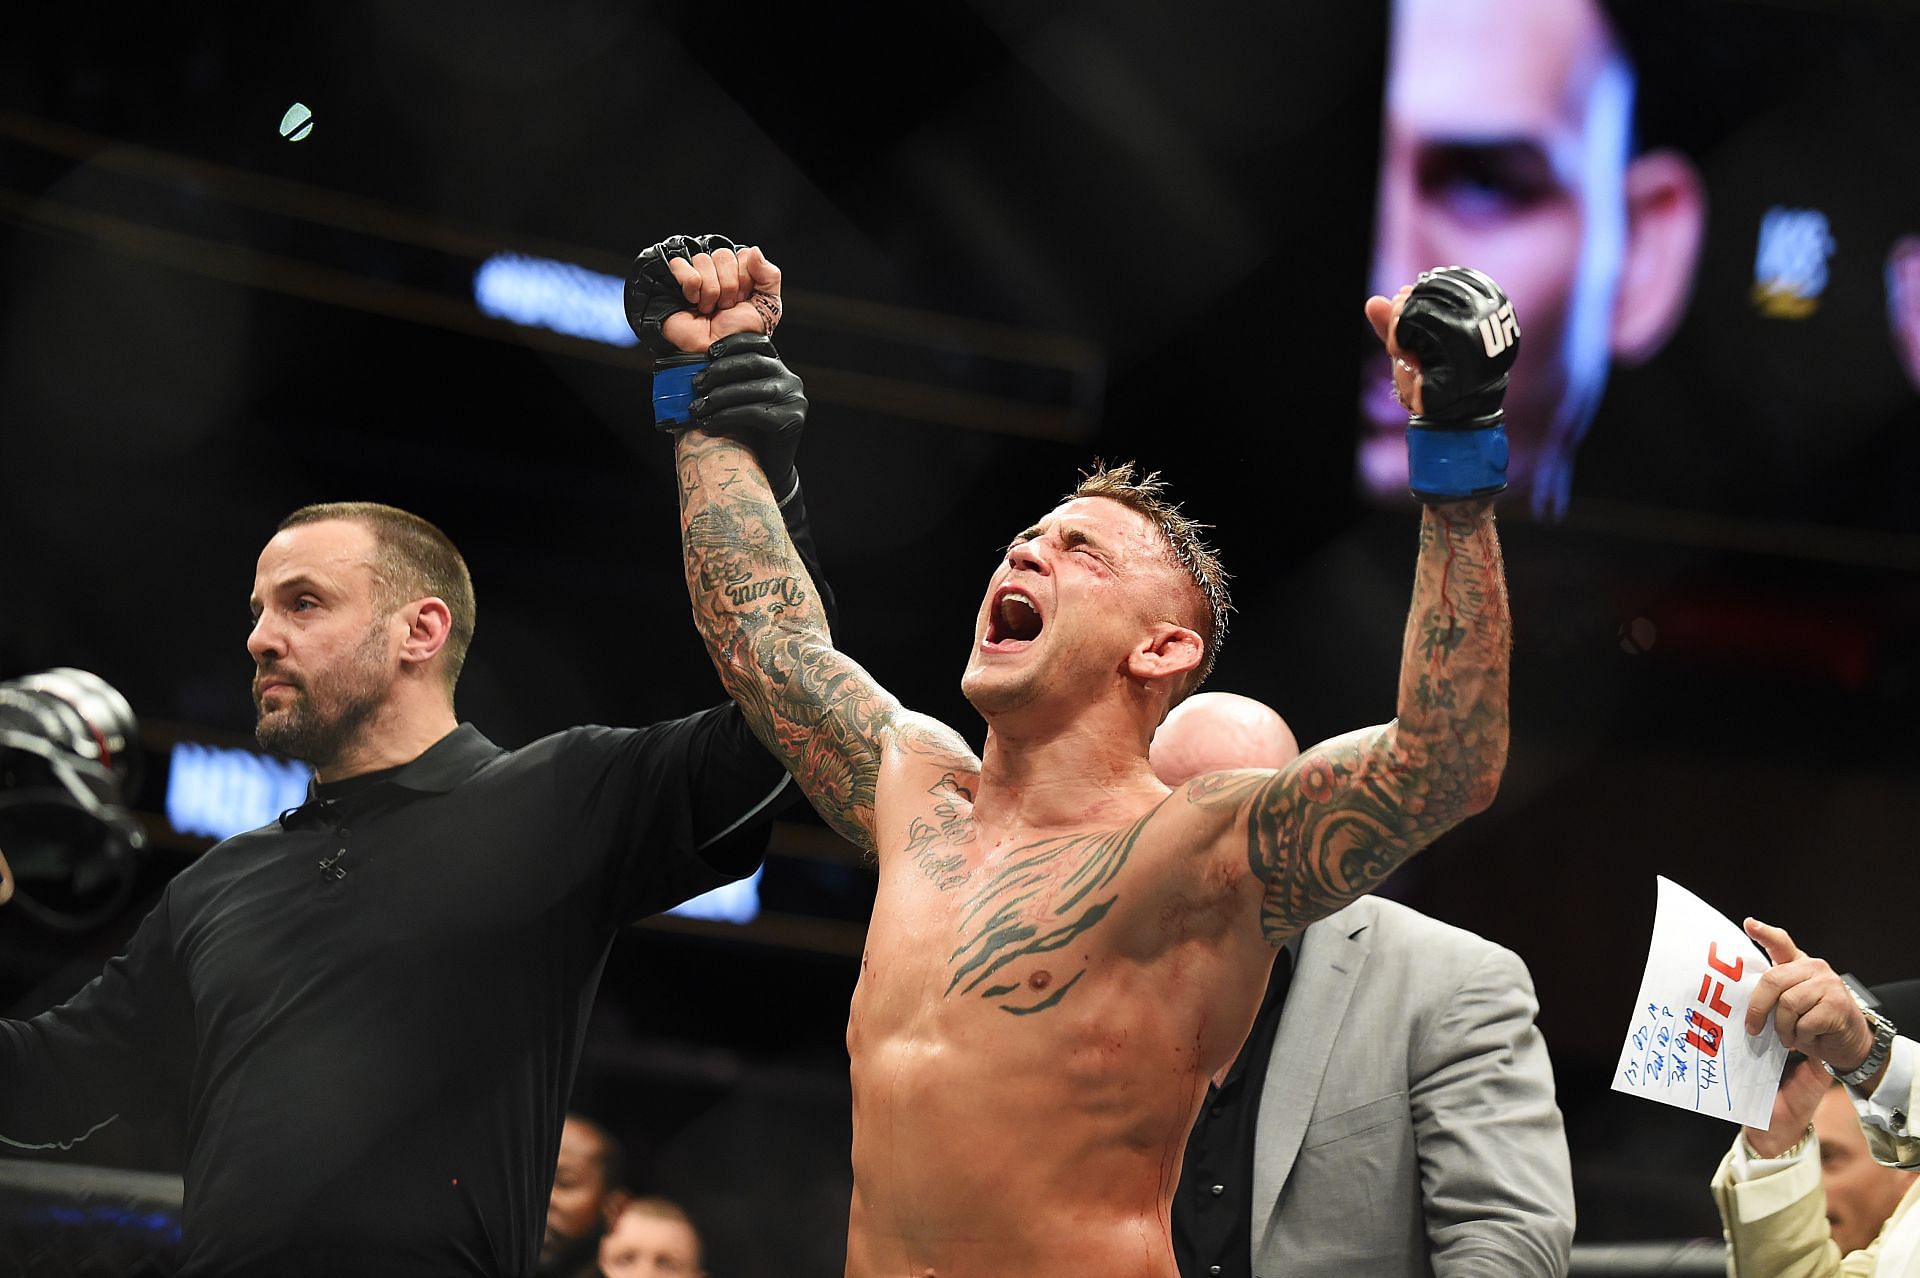 Dustin Poirier has been used to training for five-round bouts in recent years